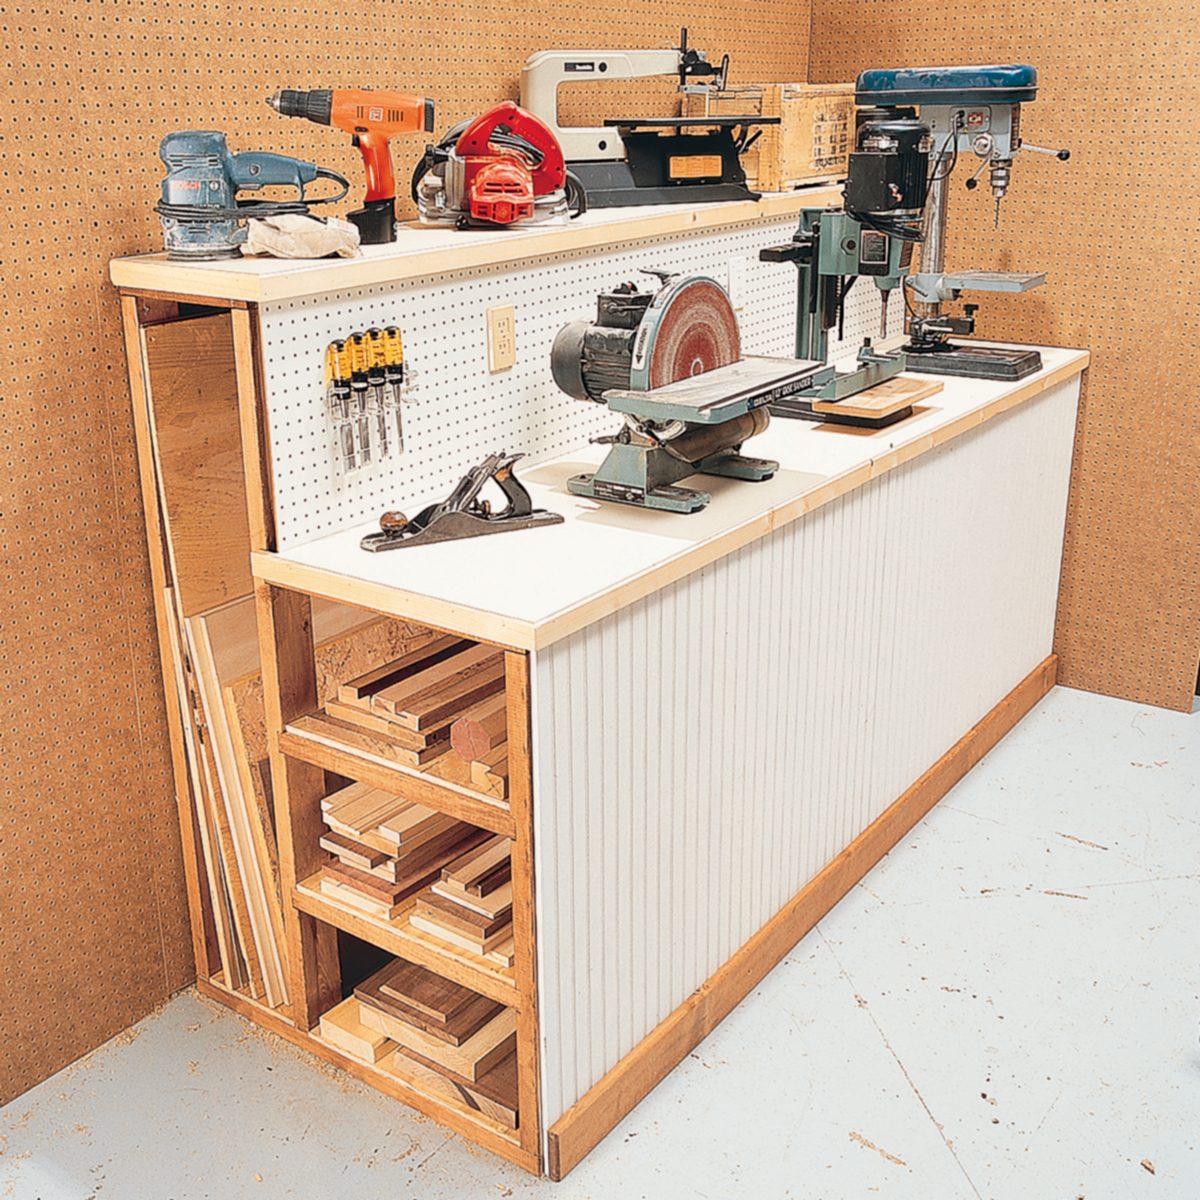 Compact Power Tool Organizer - Fully Assembled Wood Tool Chest and